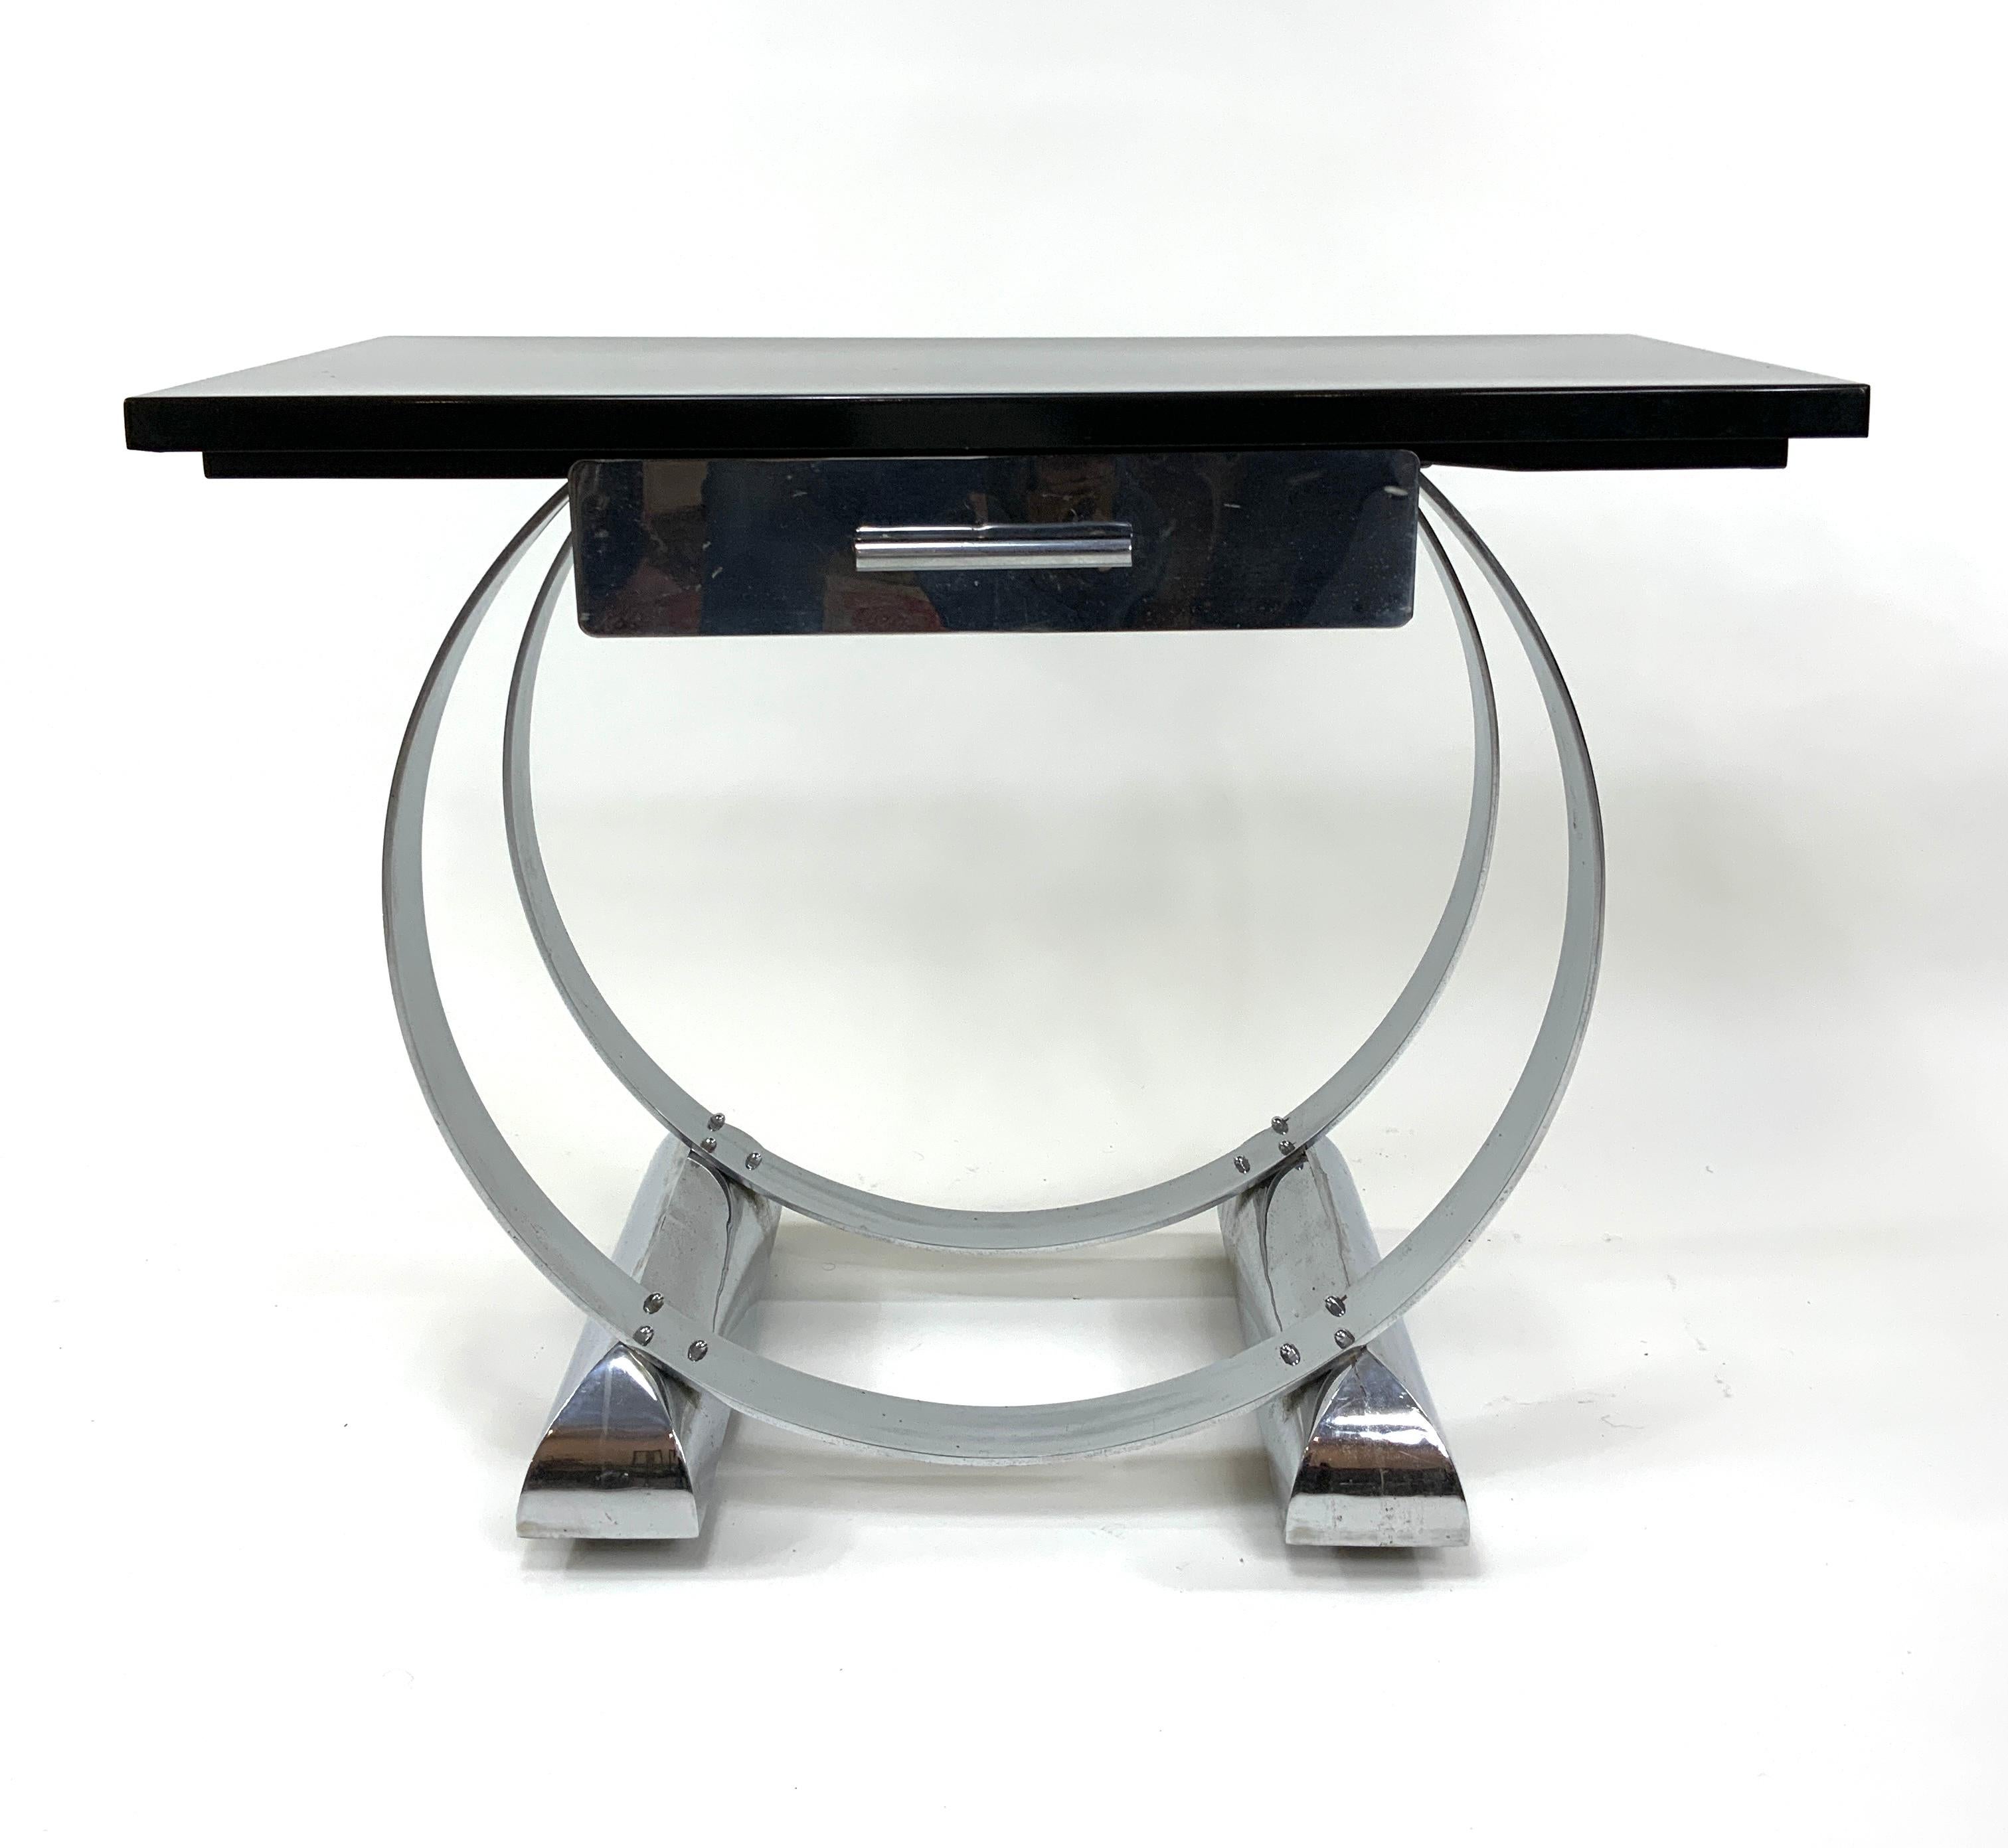 A magnificent Art Deco console table in the style of Donald Deskey featuring two concentric circular chromed metal flat iron bars mounted on two unusual and splendidly-shaped chromed metal bases. The latter conceal wheeled castors which permit easy